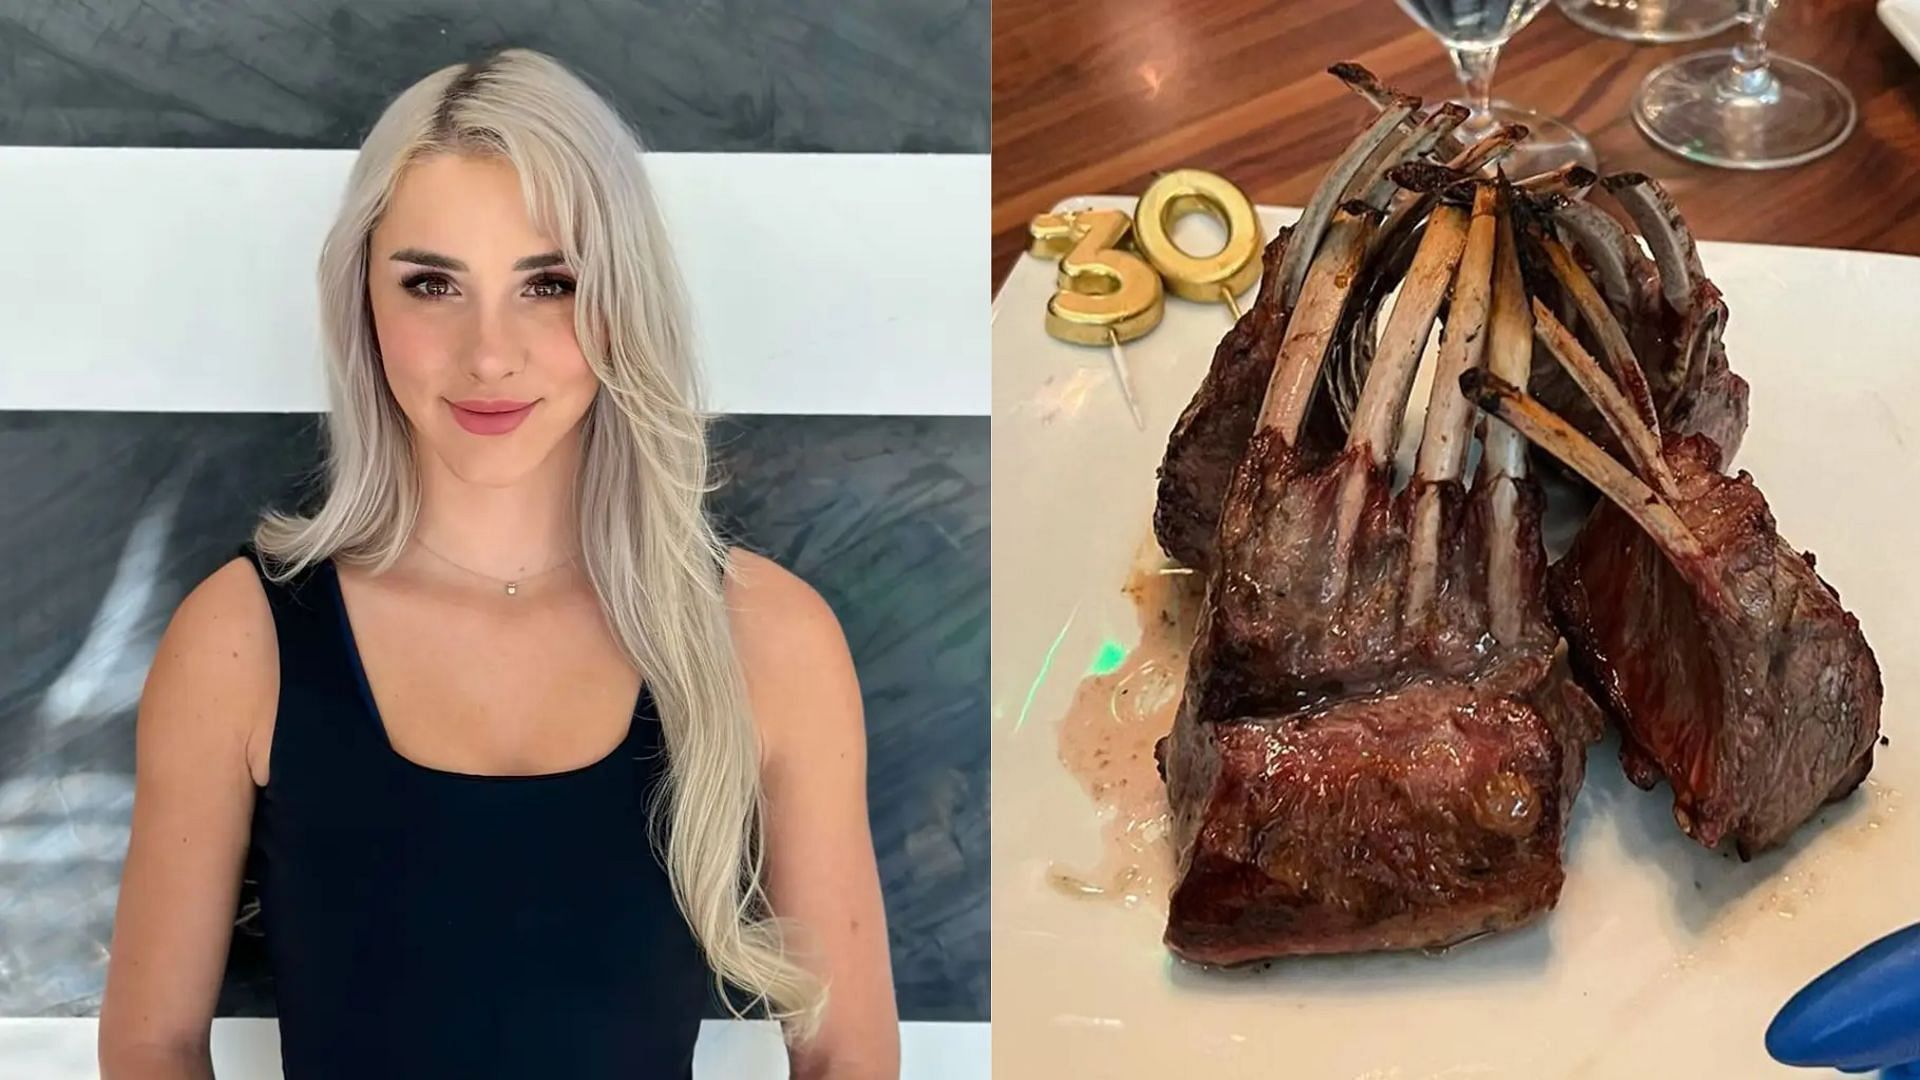 Mikhaila Peterson (L) is supposed to have started the diet (Image via Instagram)